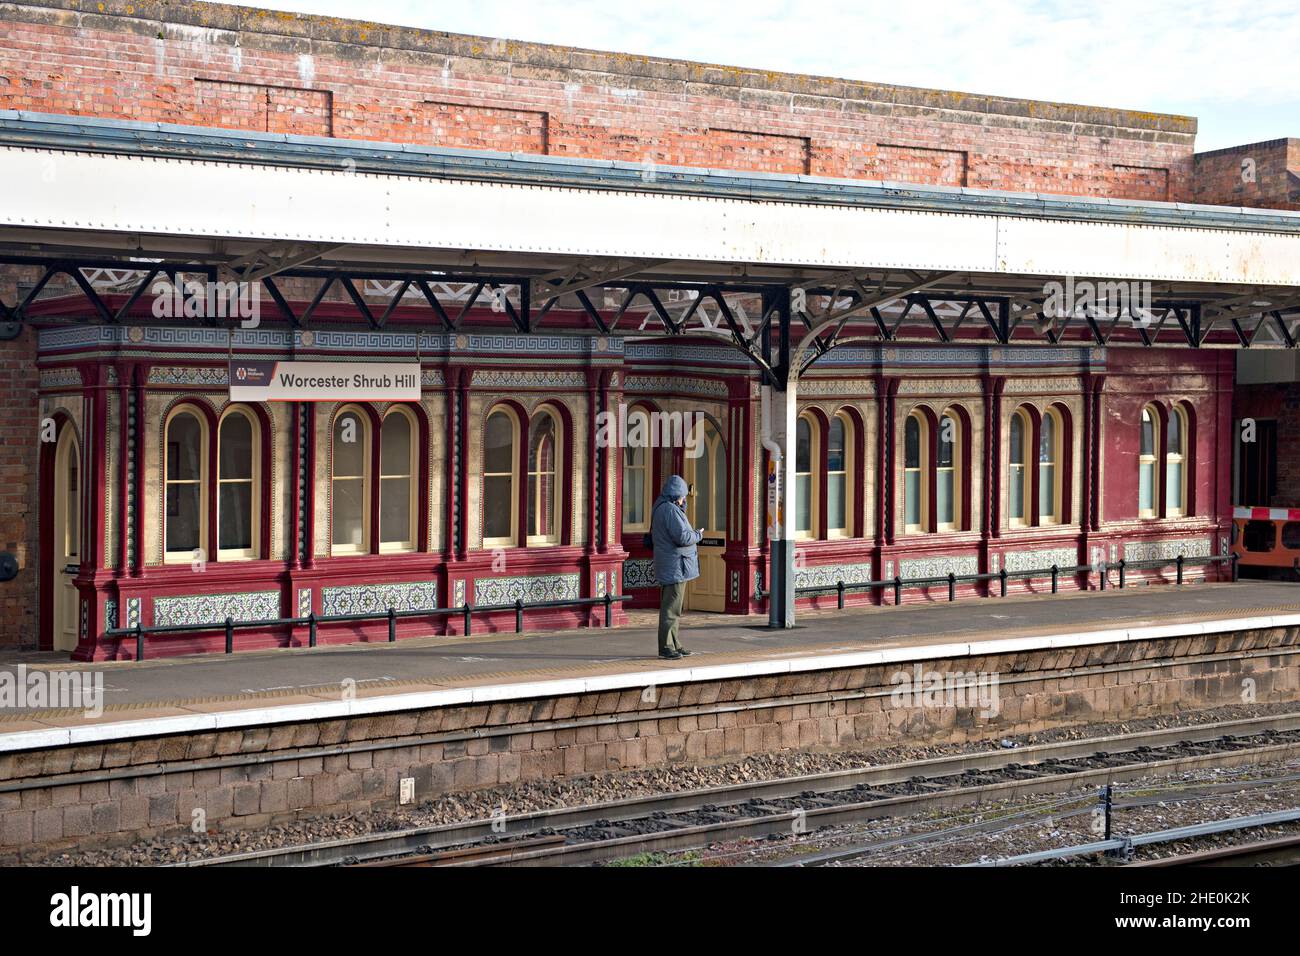 The restored and refurbished passenger waiting rooms at Worcester Shrub Hill railway station, UK Stock Photo